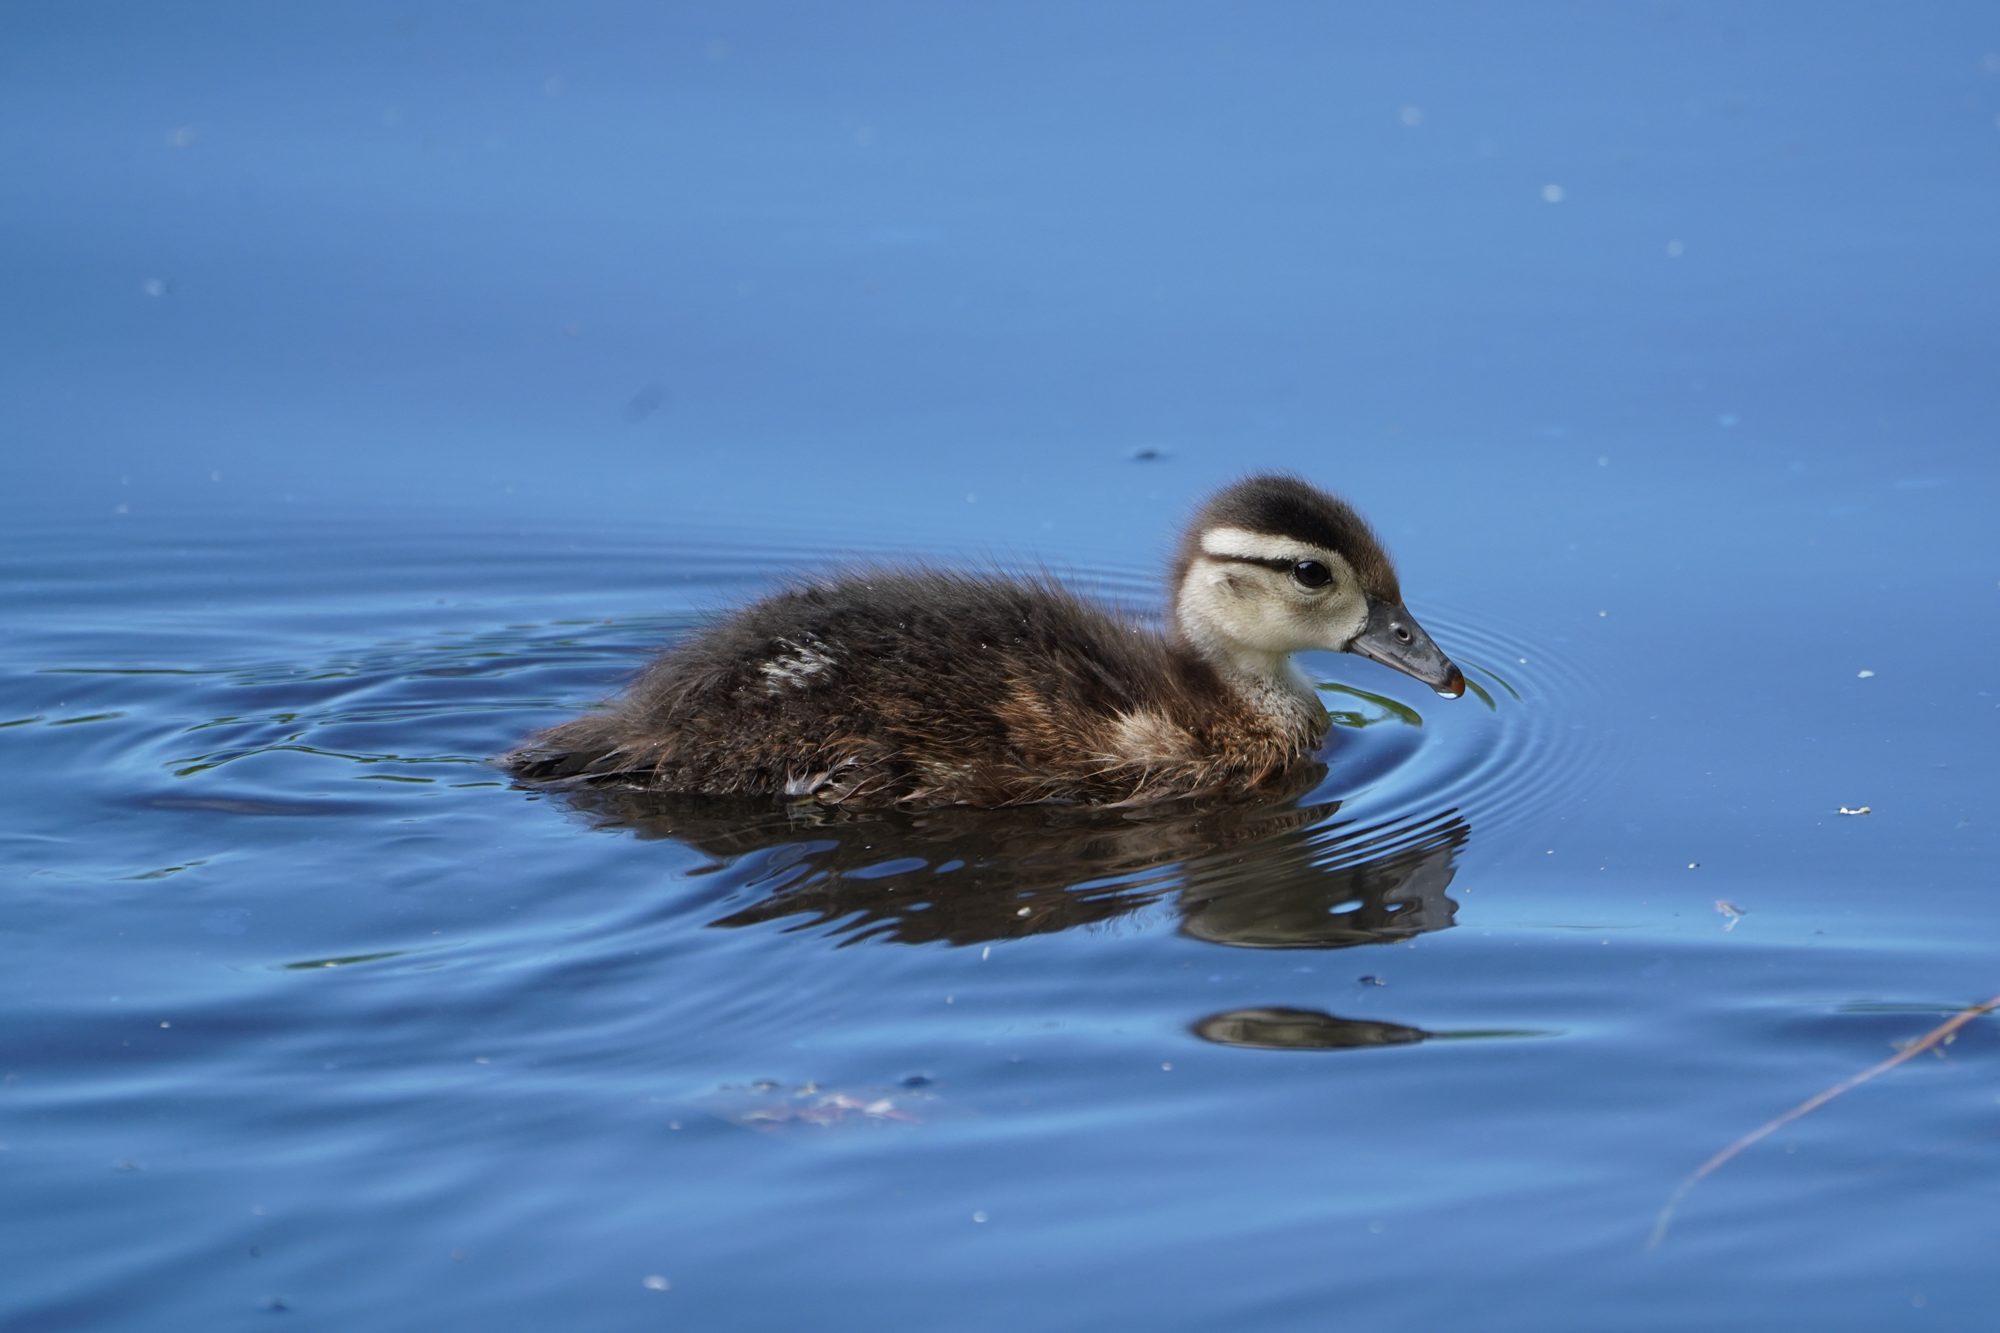 A Wood duckling swimming along